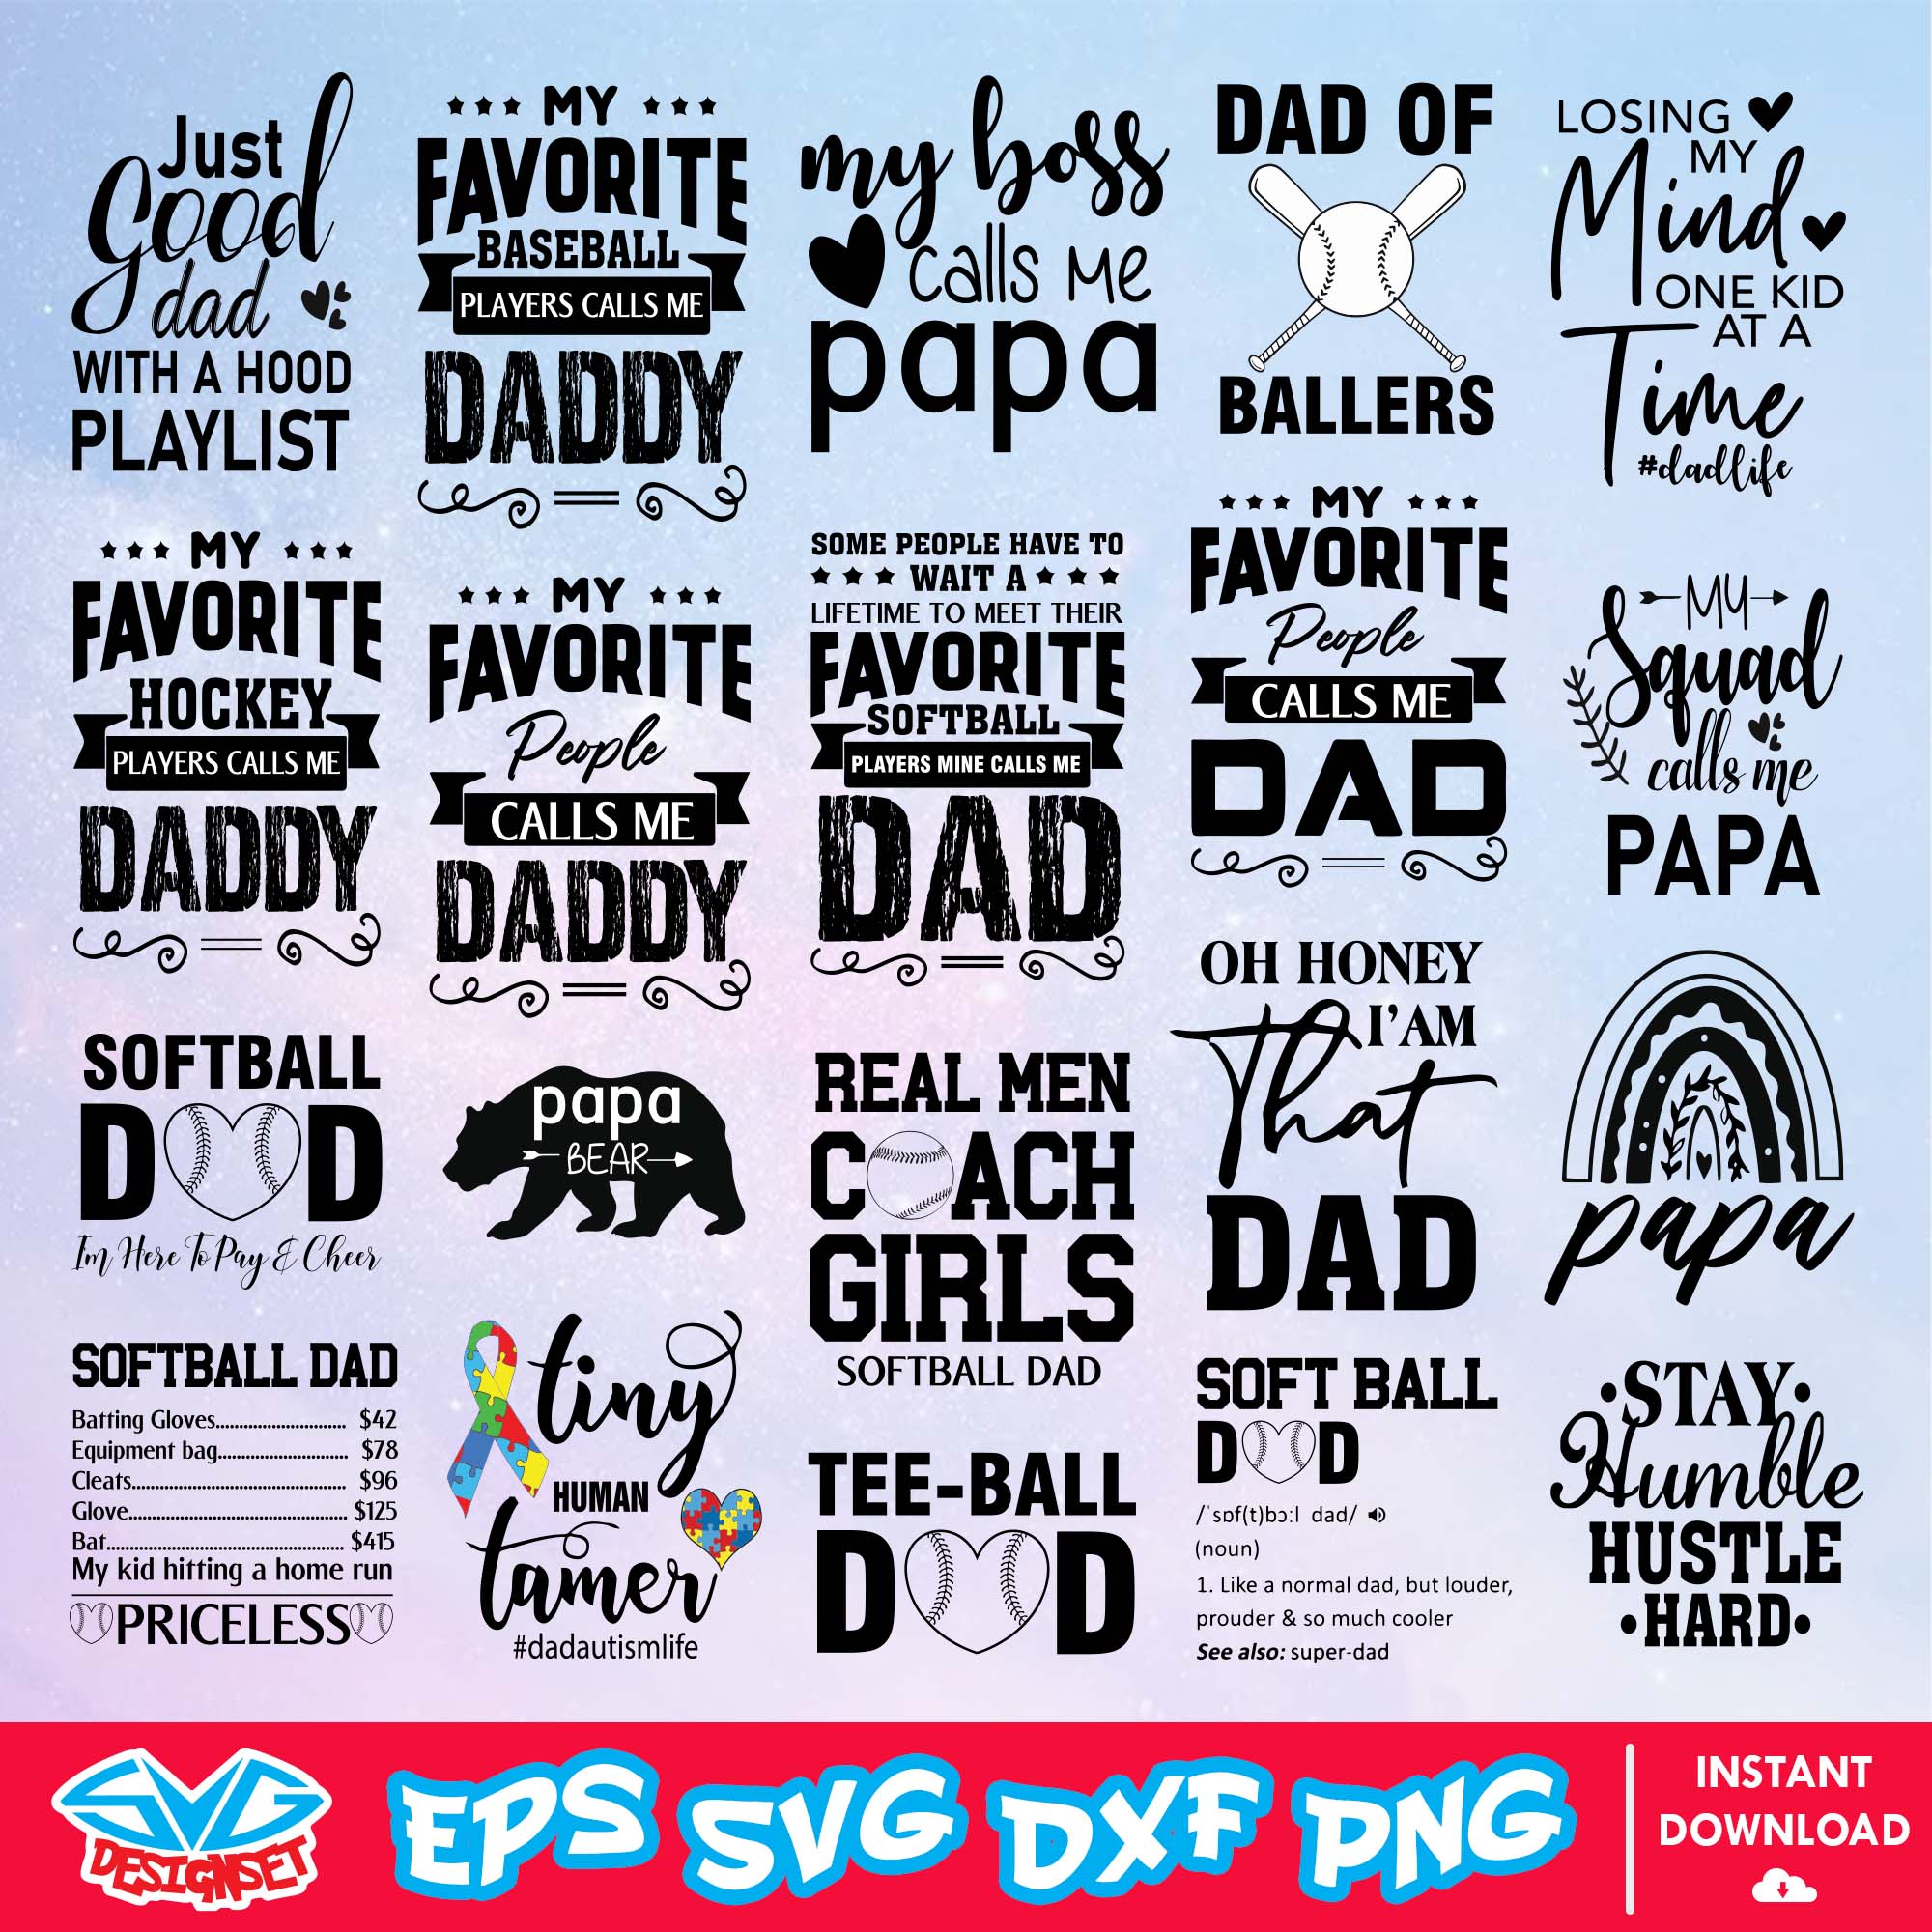 Happy Father's Day Bundle Svg, Dxf, Eps, Png, Clipart, Silhouette and Cut files for Cricut & Silhouette Cameo 4 - SVGDesignSet